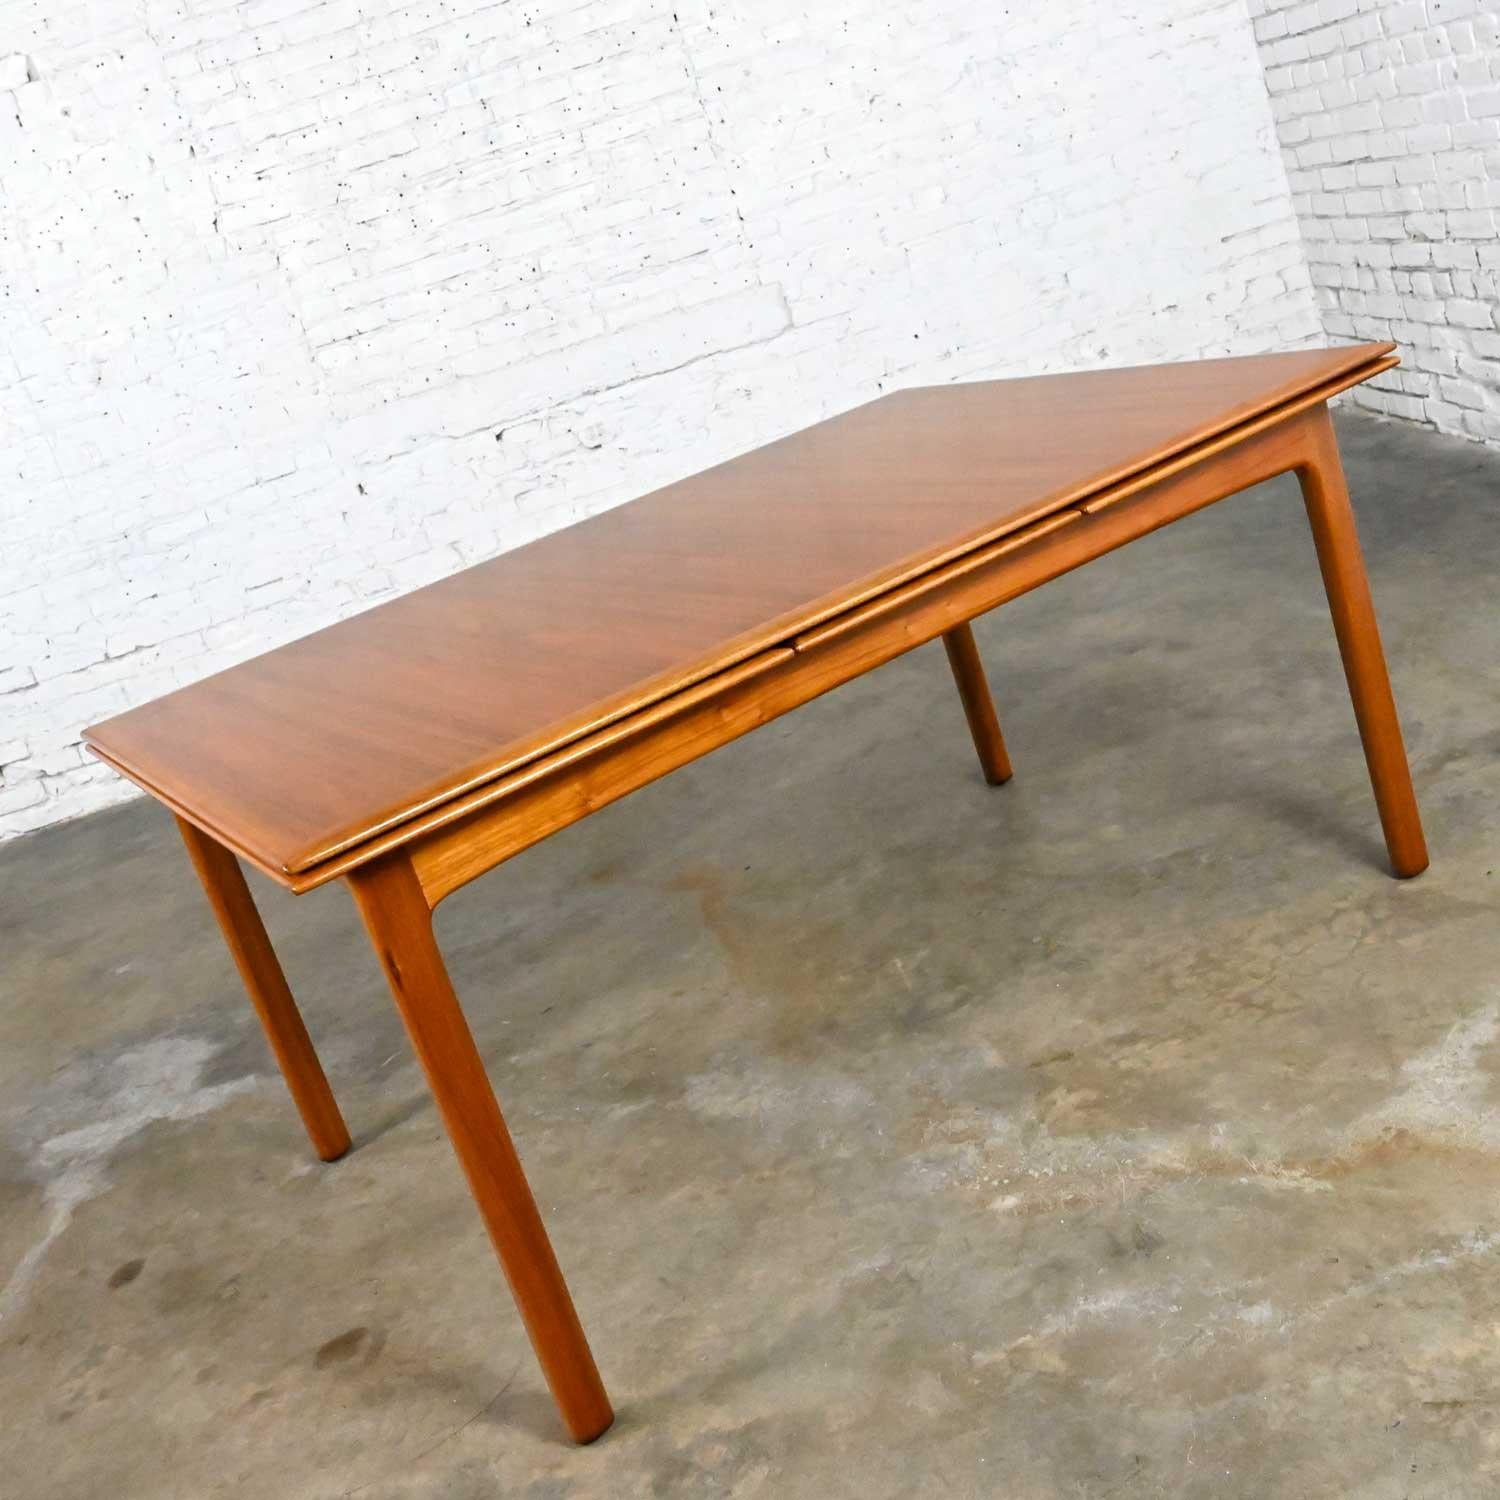 Handsome vintage Scandinavian Modern teak draw leaf extending dinning table by Folke Ohlsson for DUX. Beautiful condition, keeping in mind that this is vintage and not new so will have signs of use and wear. There is a mark on each leaf where it has